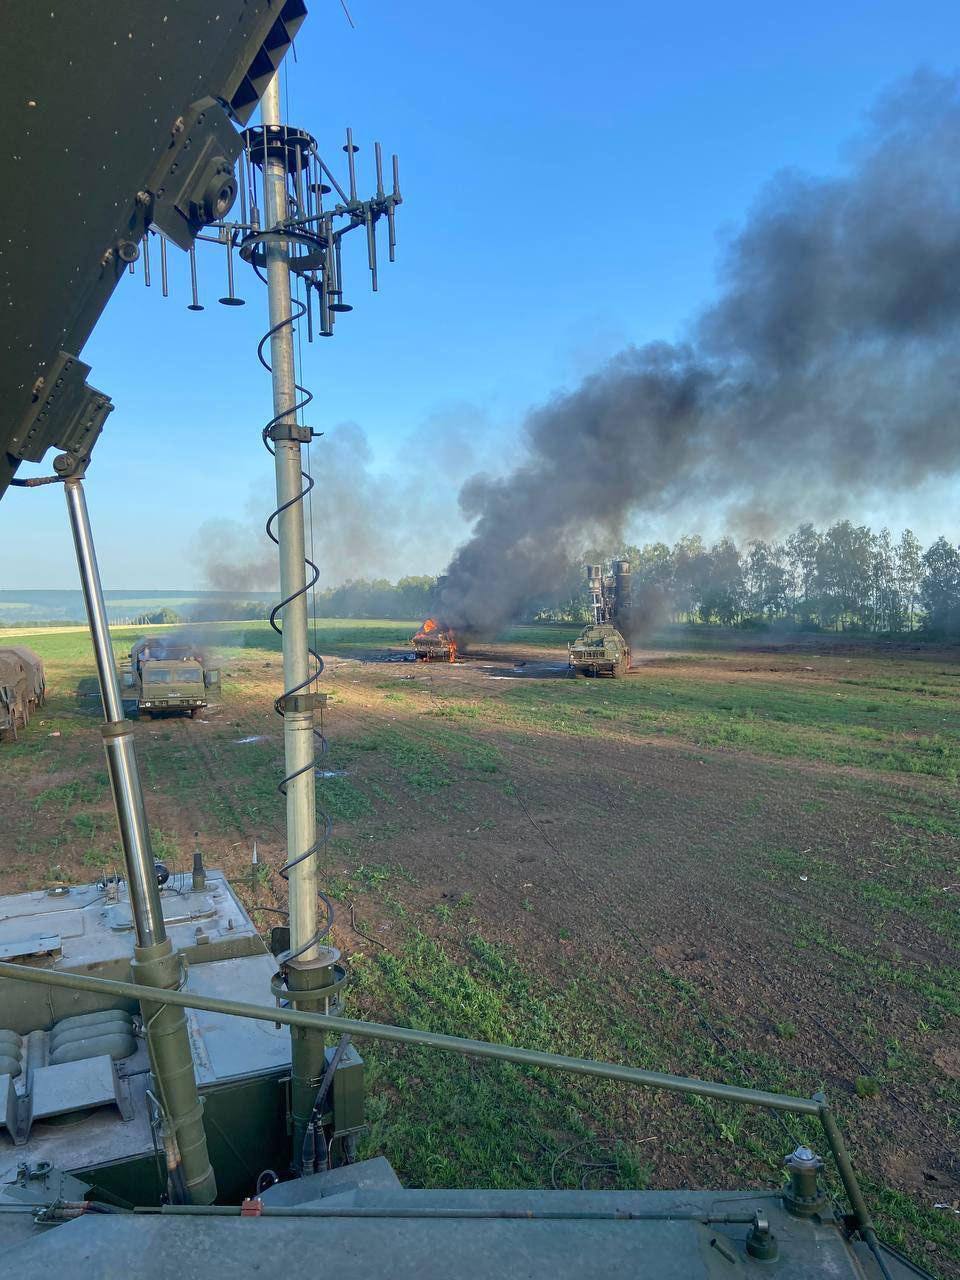 Photos and video of the destruction of the Russian air defense system S-300/400 in the territory of the Belgorod region of the Russian Federation appeared